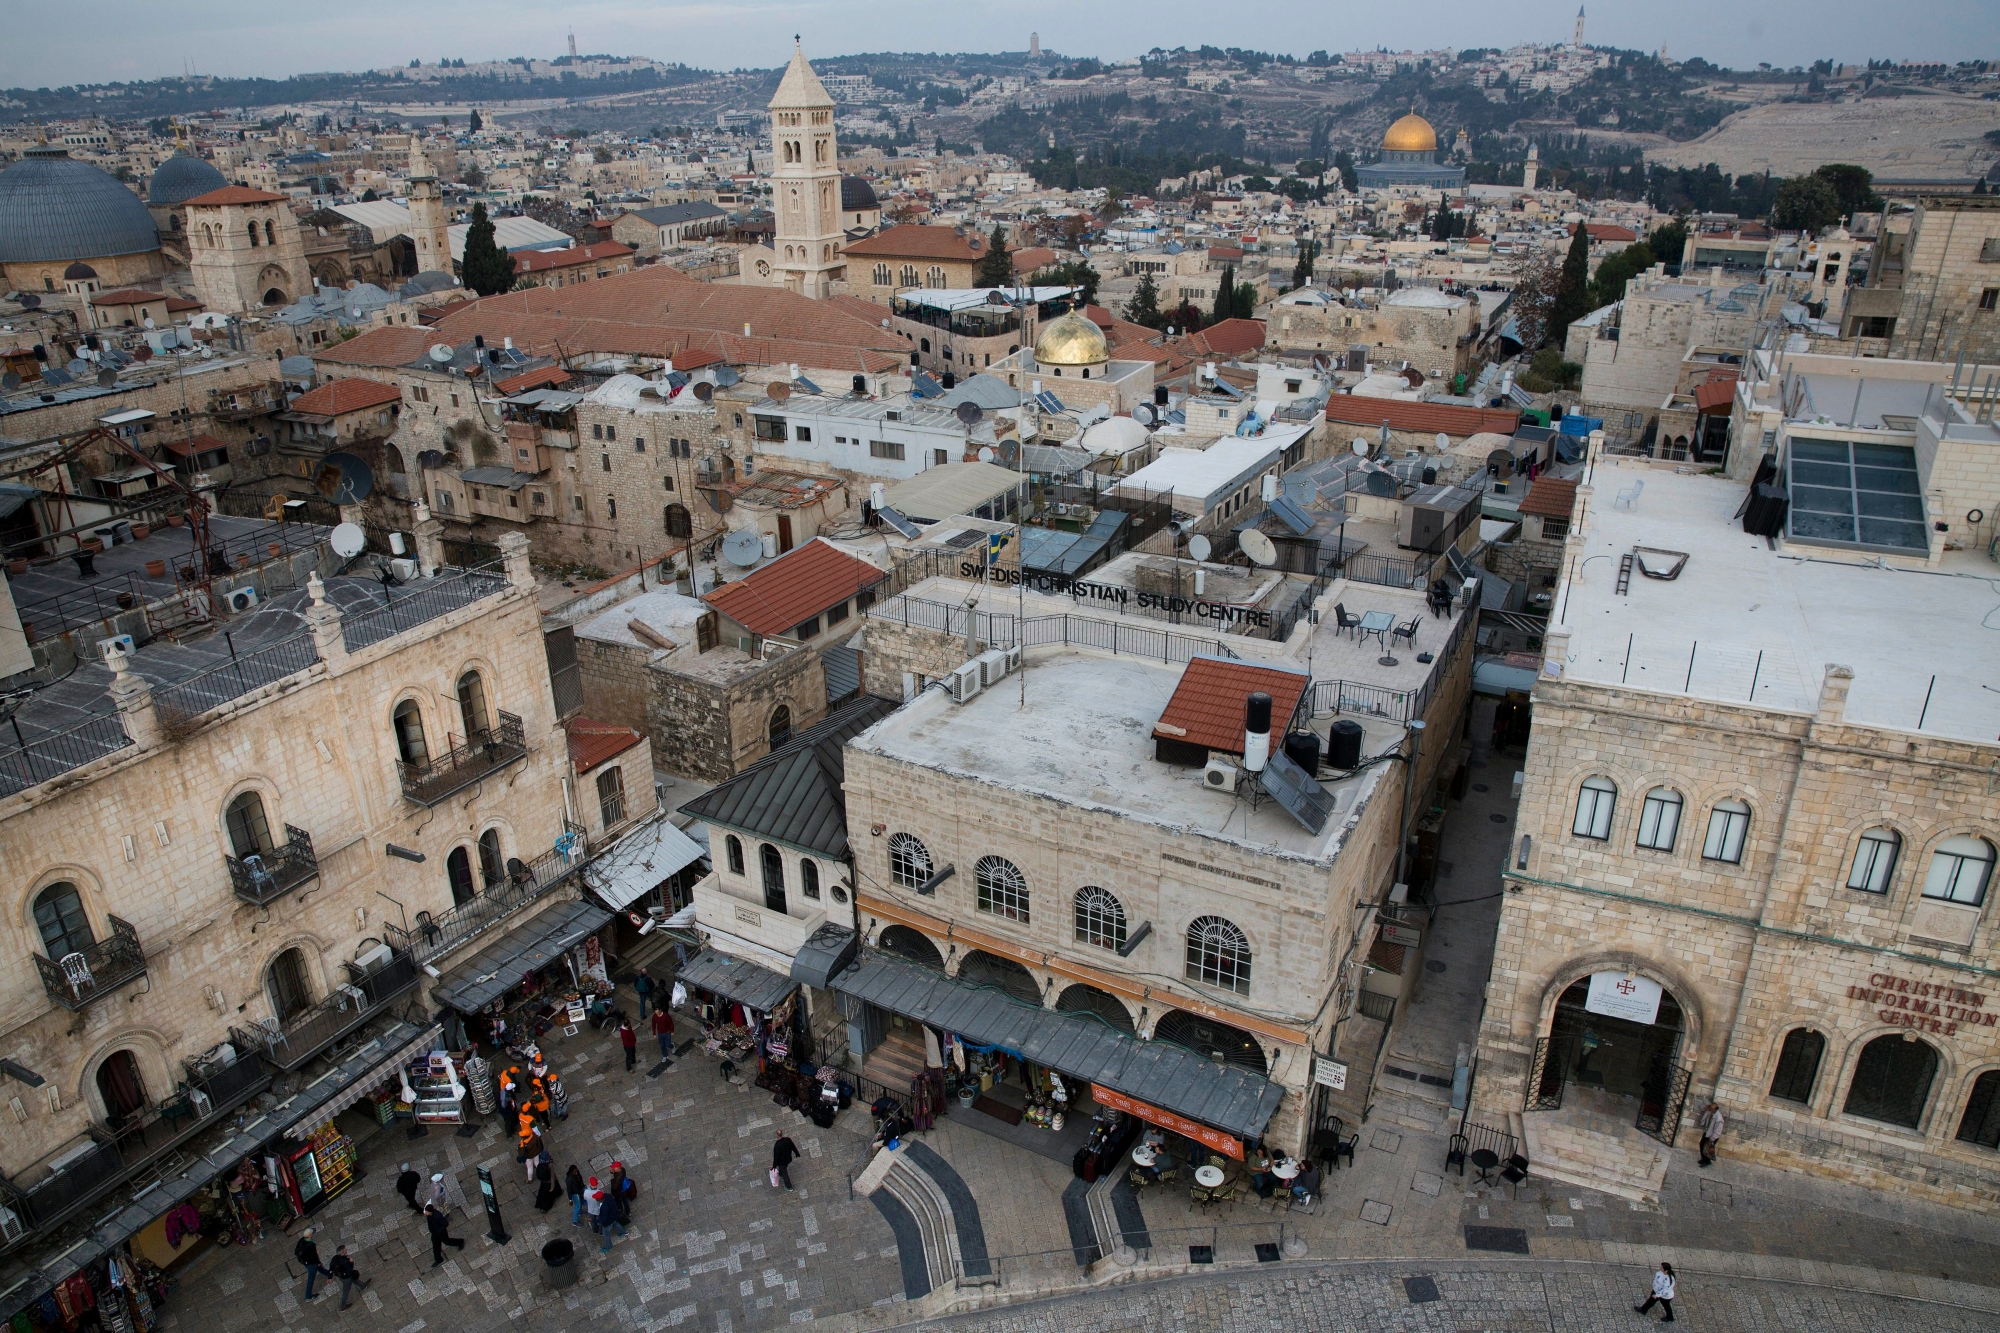 A view of Jerusalem's old city is seen Tuesday, Dec. 5, 2017. U.S. officials have said that President Trump may recognize Jerusalem as Israel's capital this week as a way to offset his likely decision to delay his campaign promise of moving the U.S. Embassy there. Trump's point-man on the Middle East, son-in-law Jared Kushner, later said the president hasn't decided yet what steps to take. (AP Photo/Oded Balilty) Trump Jerusalem